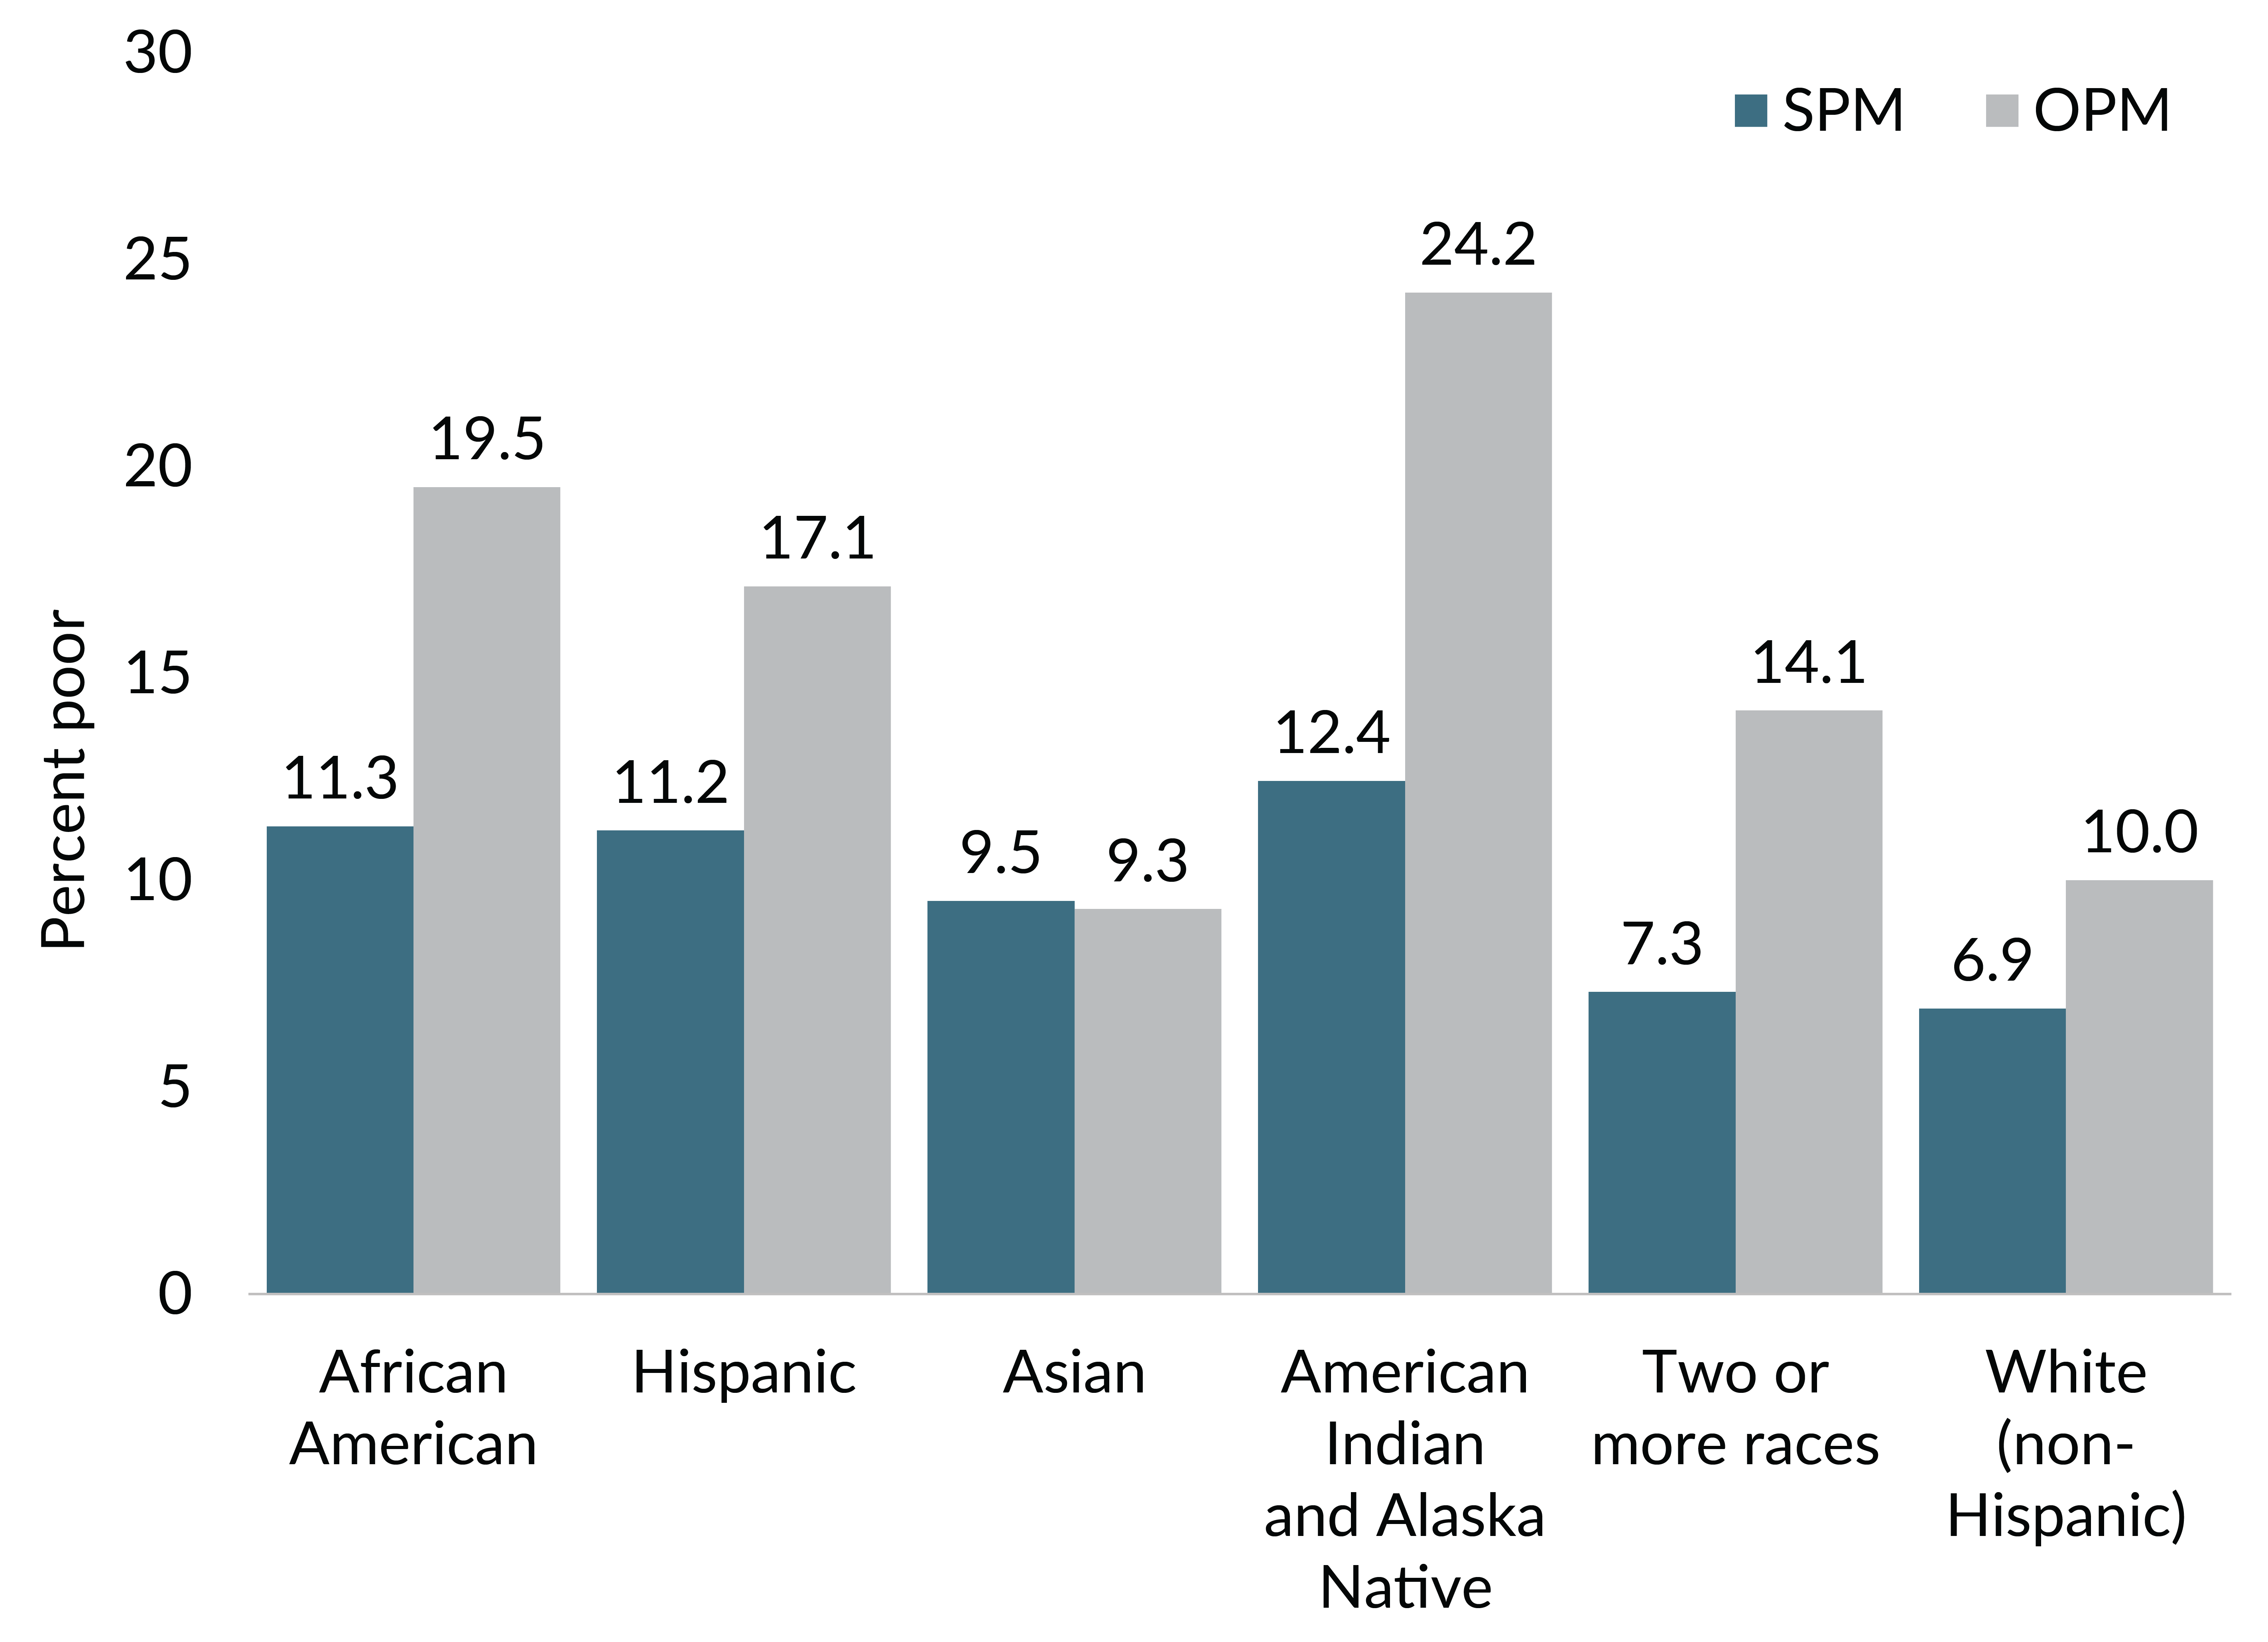 Figure shows column chart with SPM and OPM poverty rates for African American, Hispanic, Asian, American Indian and Alaska Native, Two or more races, and White (non-Hispanic). 